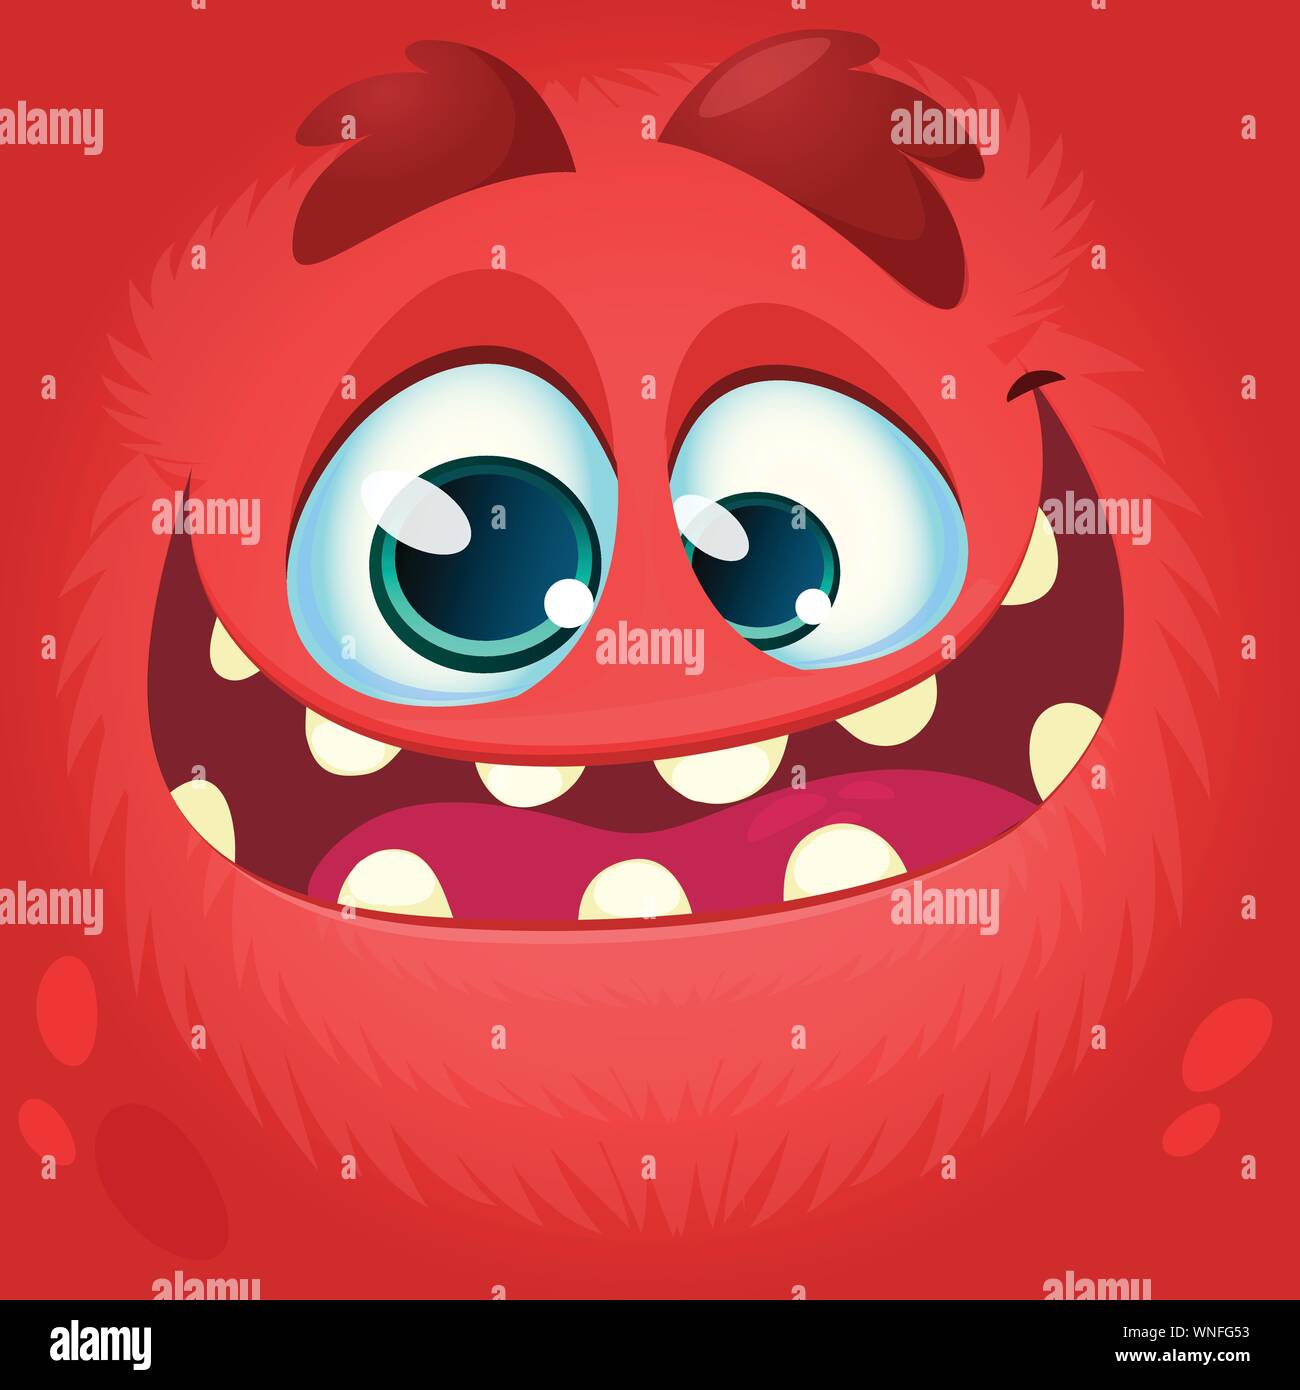 Cartoon monster face. Vector Halloween red monster avatar with wide smile Stock Vector